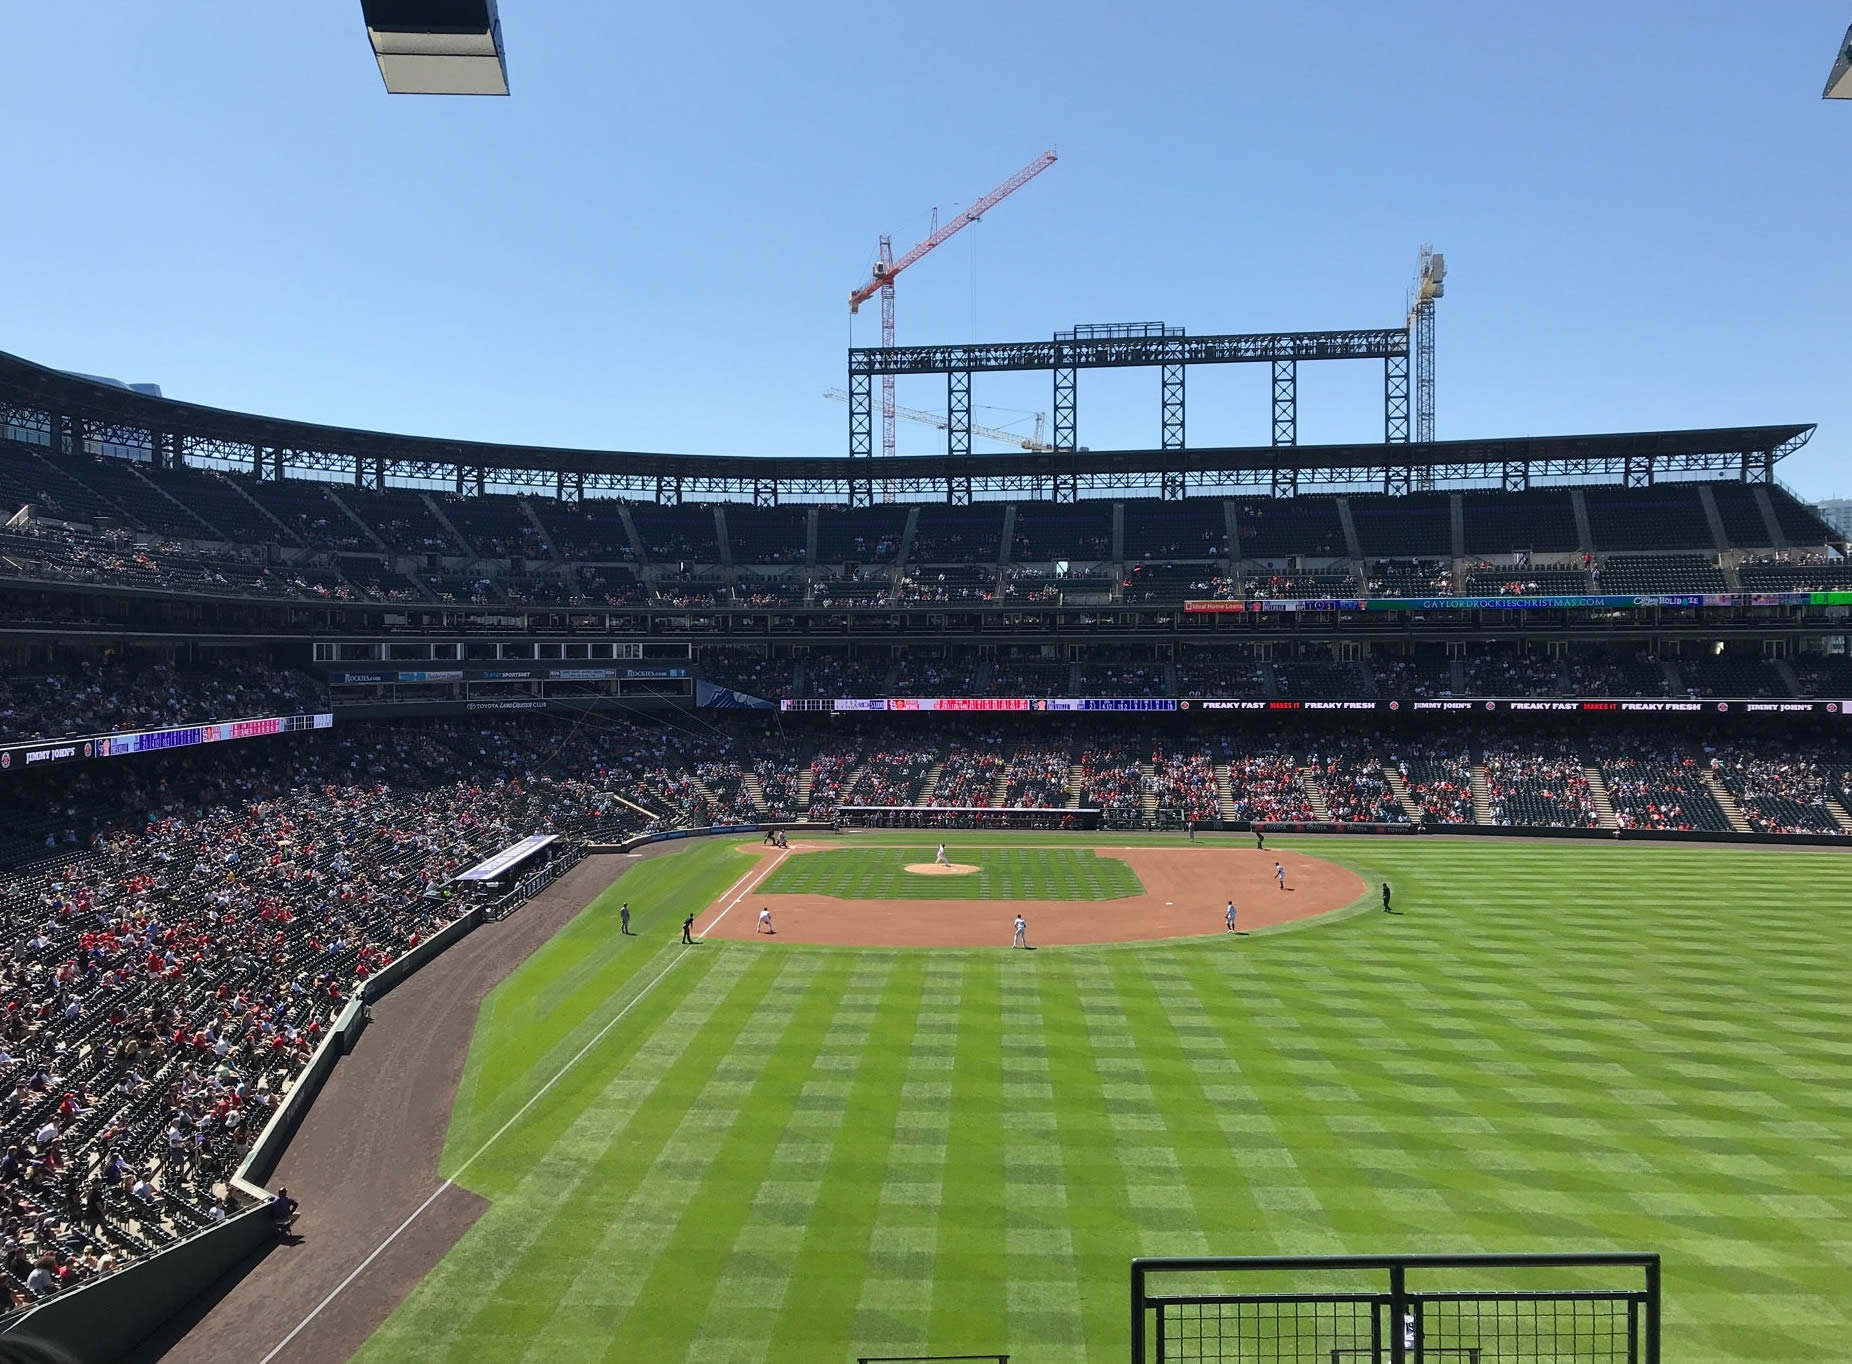 Section 206 at Coors Field 